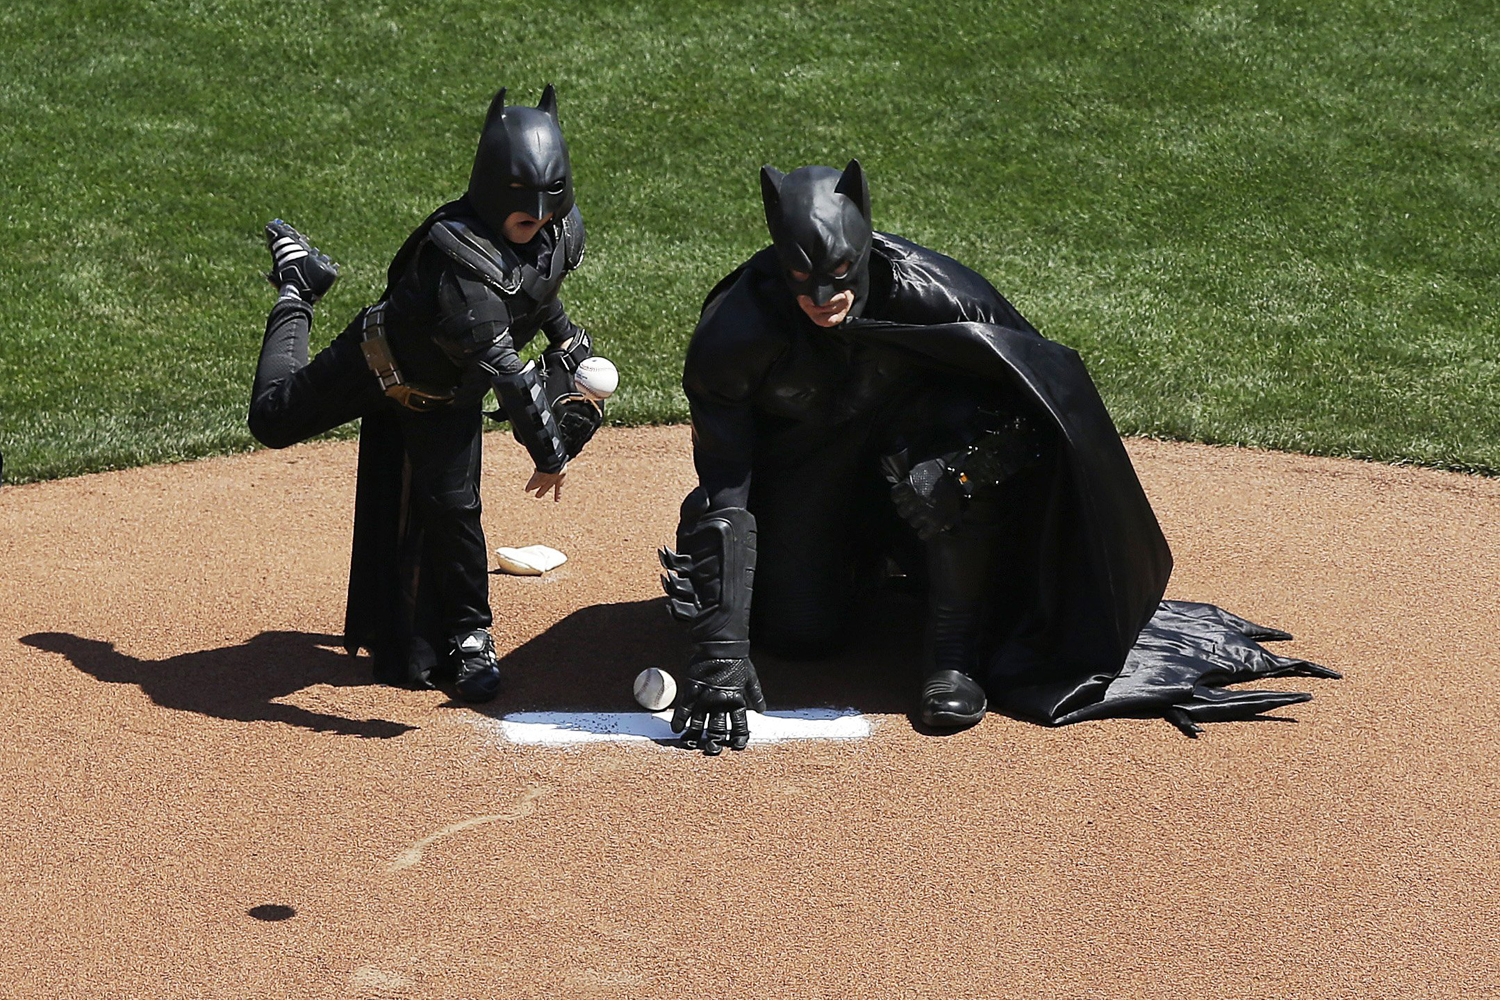 Batkid throws the opening pitch for the San Francisco Giants